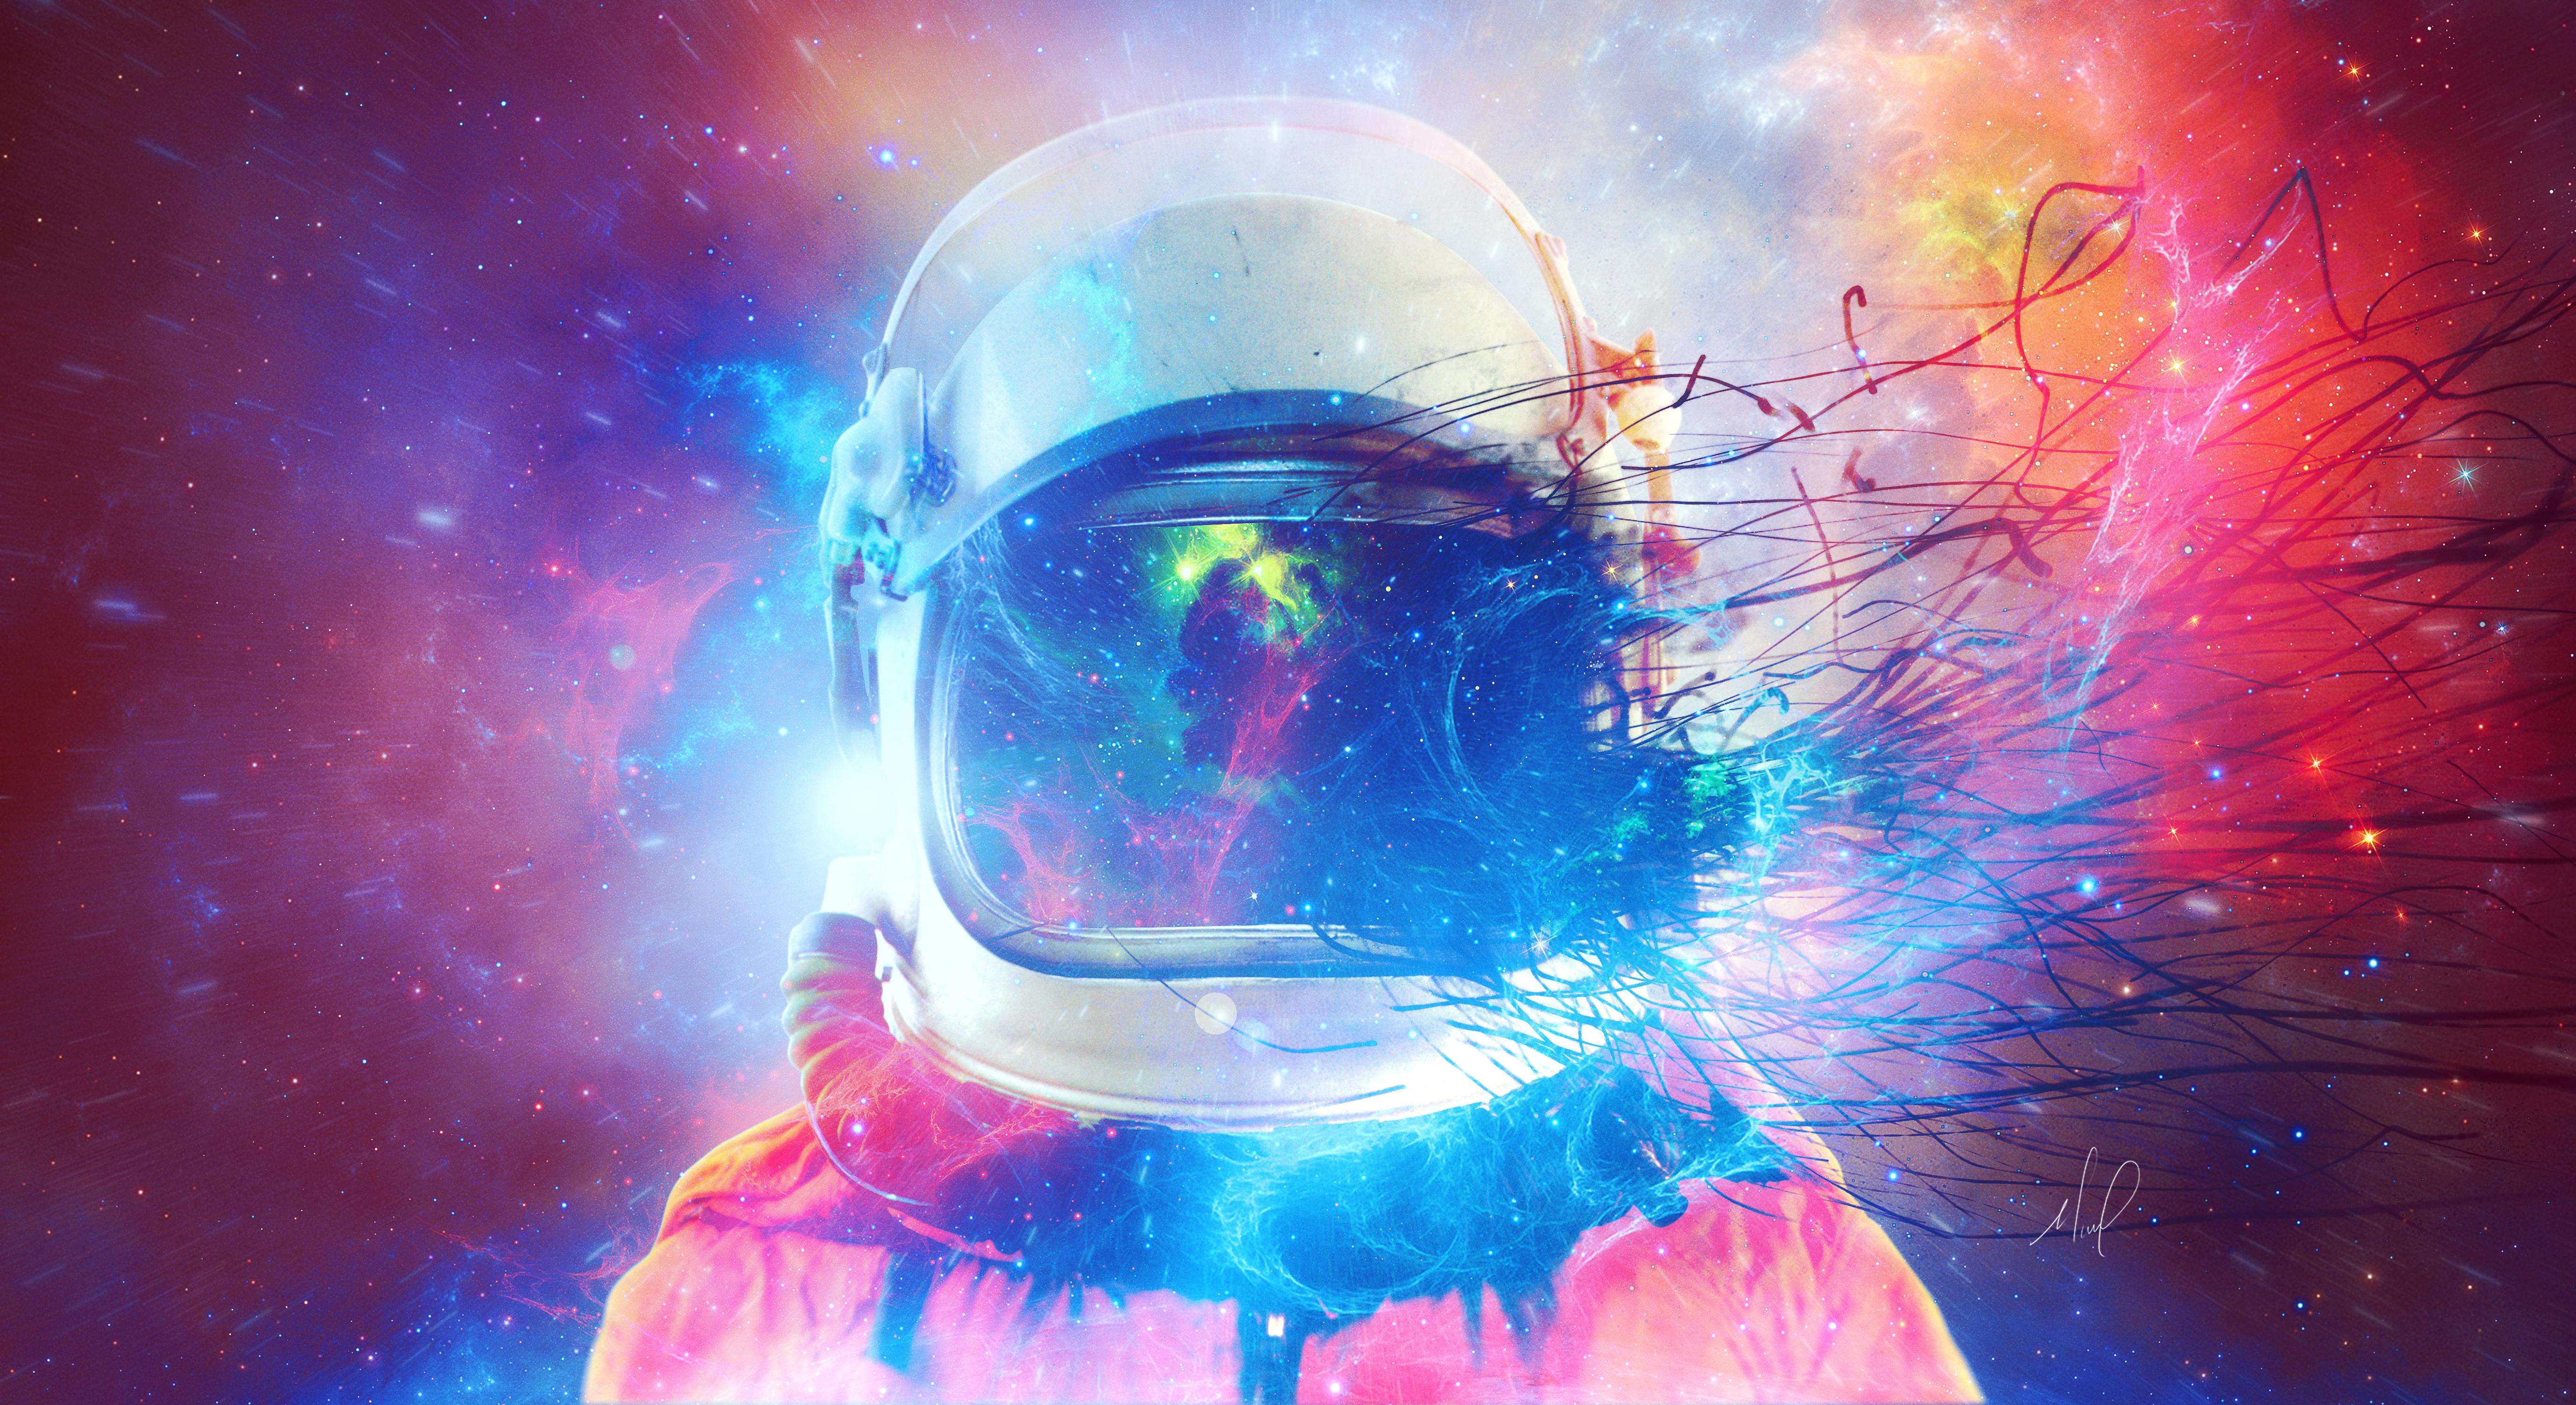 astronaut 4K wallpapers for your desktop or mobile screen free and easy to download